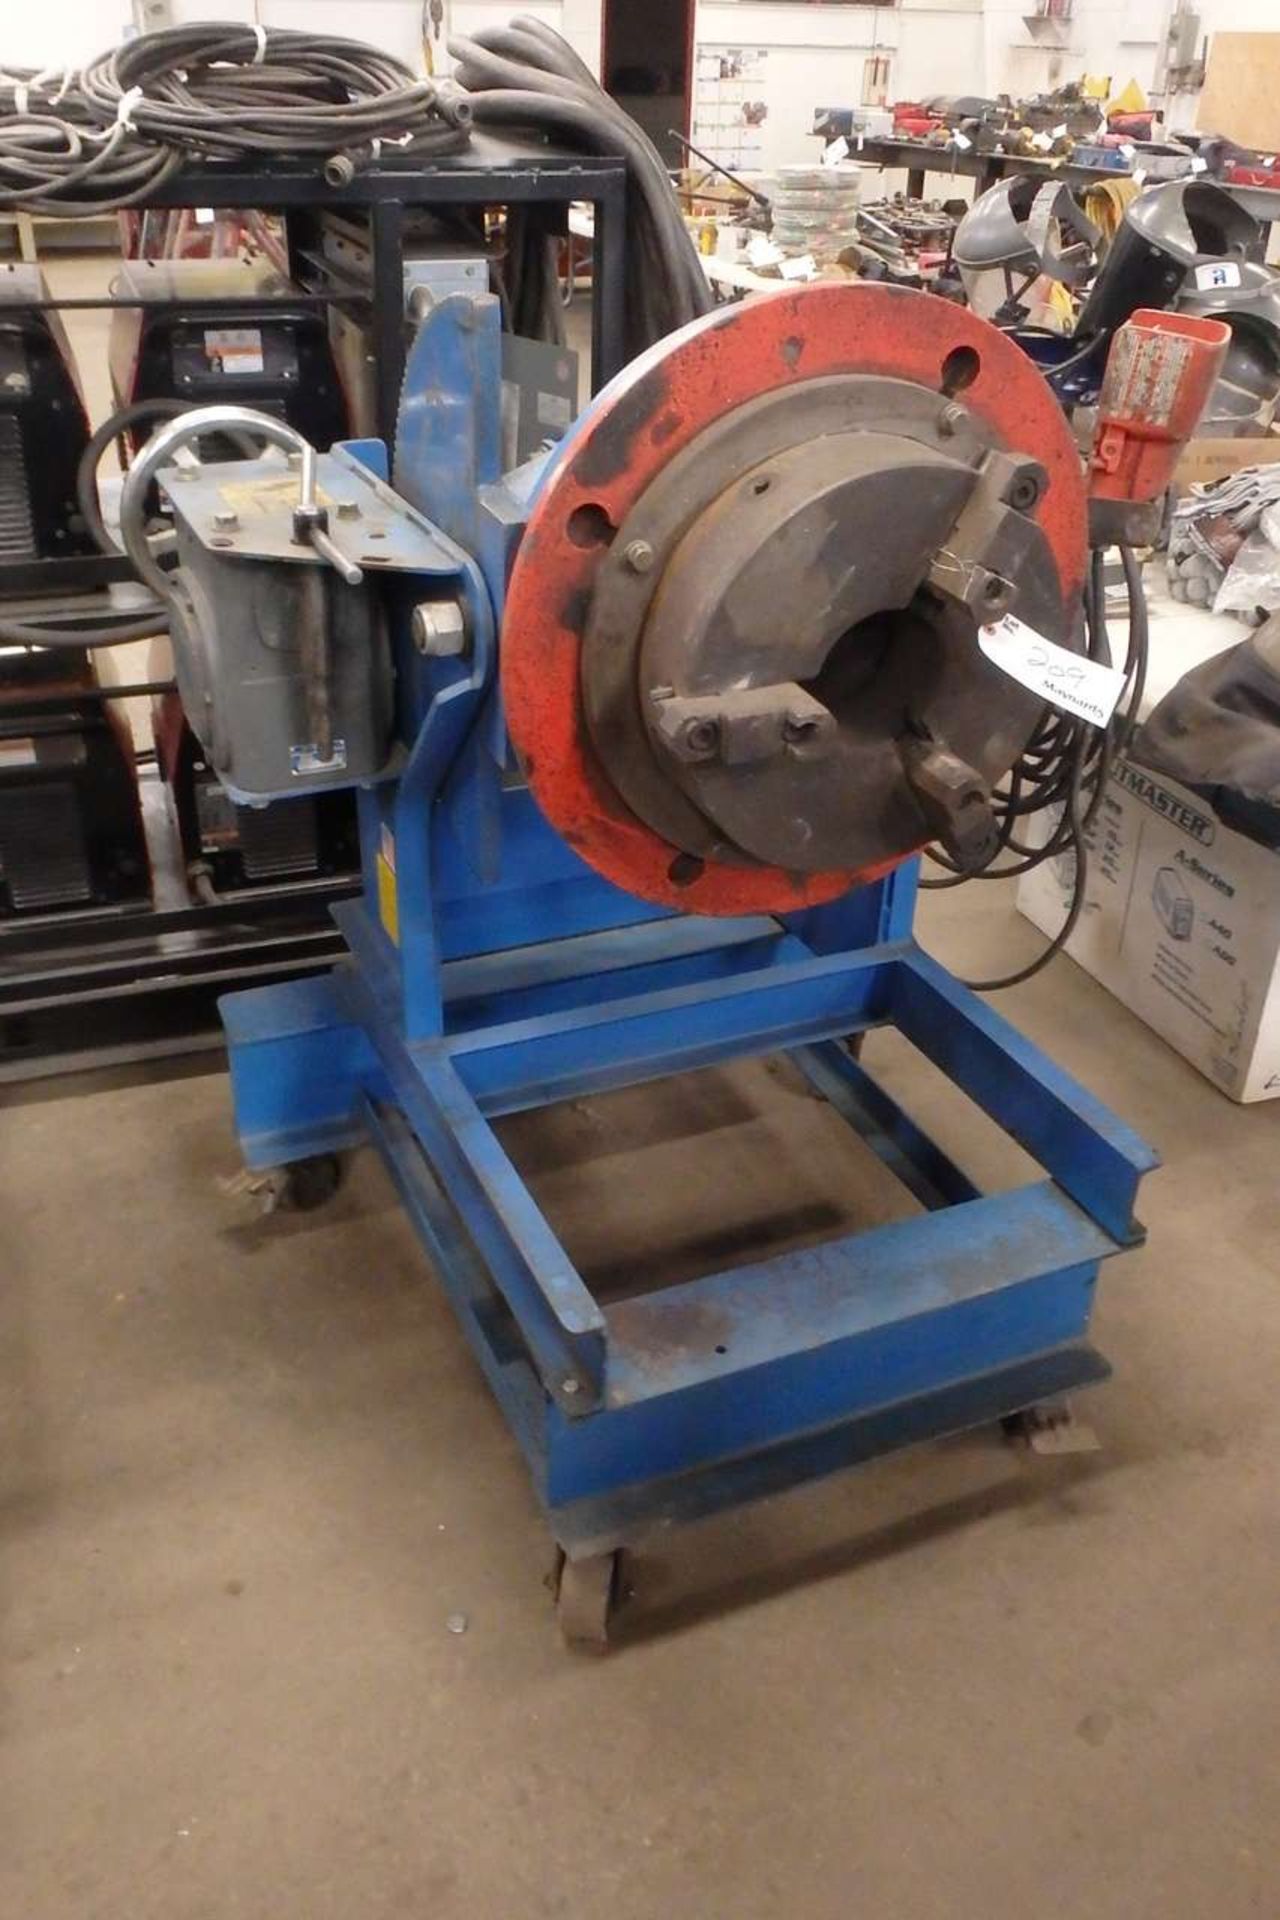 All-Fab 1504 Welding Positioner